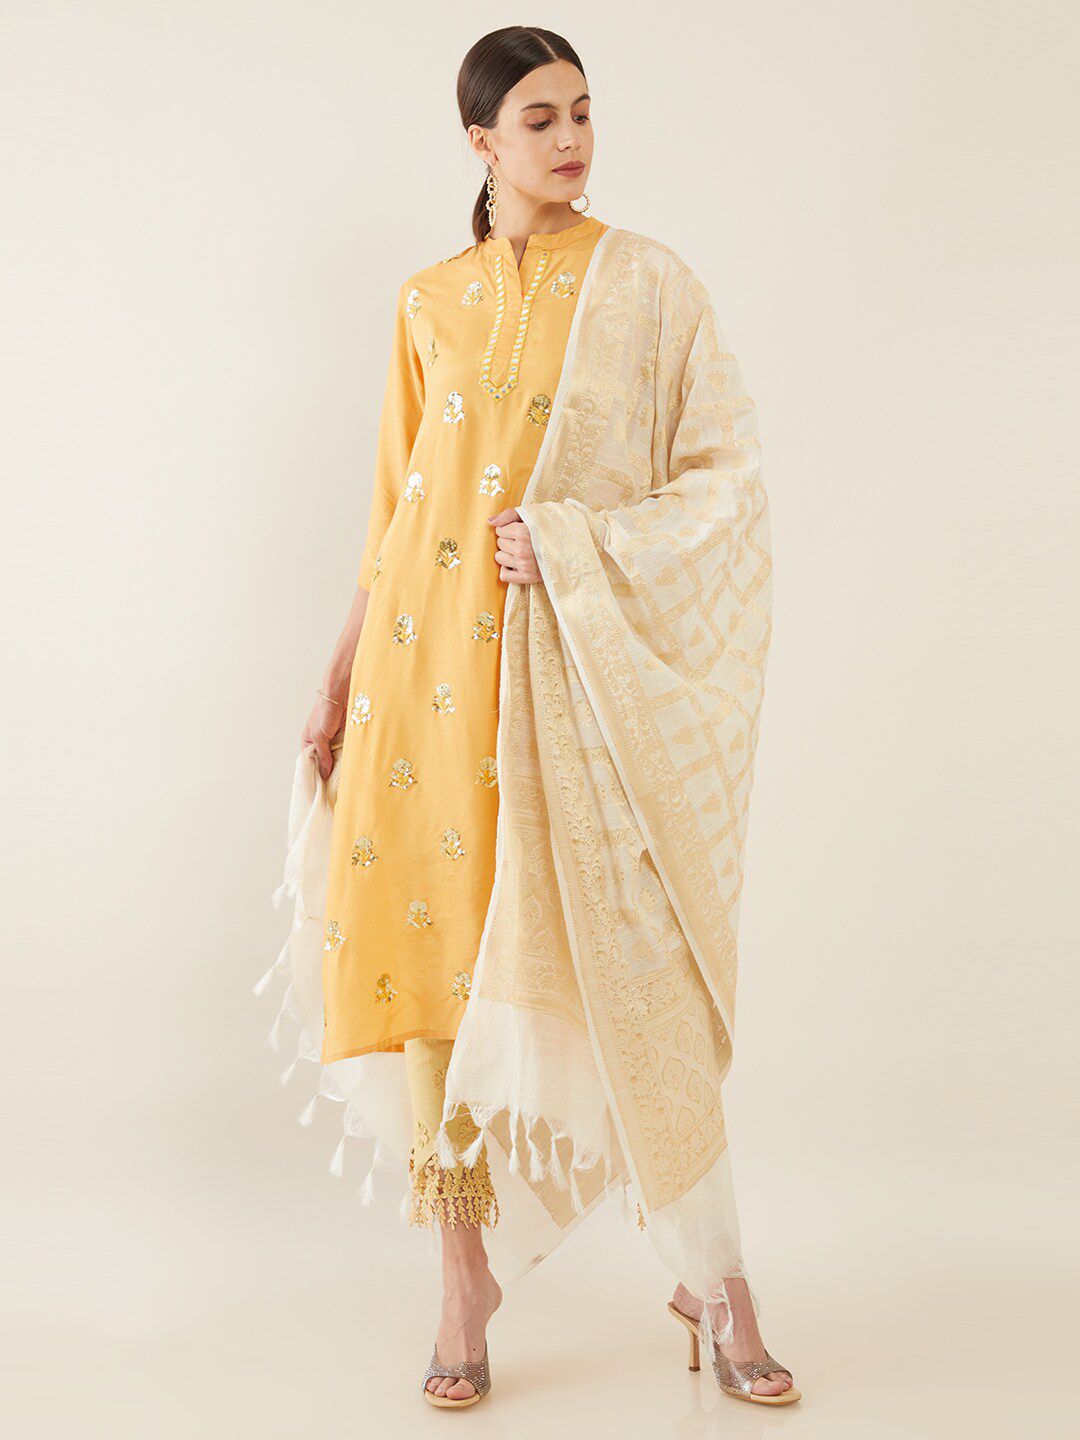 Soch White & Gold-Toned Printed Viscose Rayon Dupatta Price in India